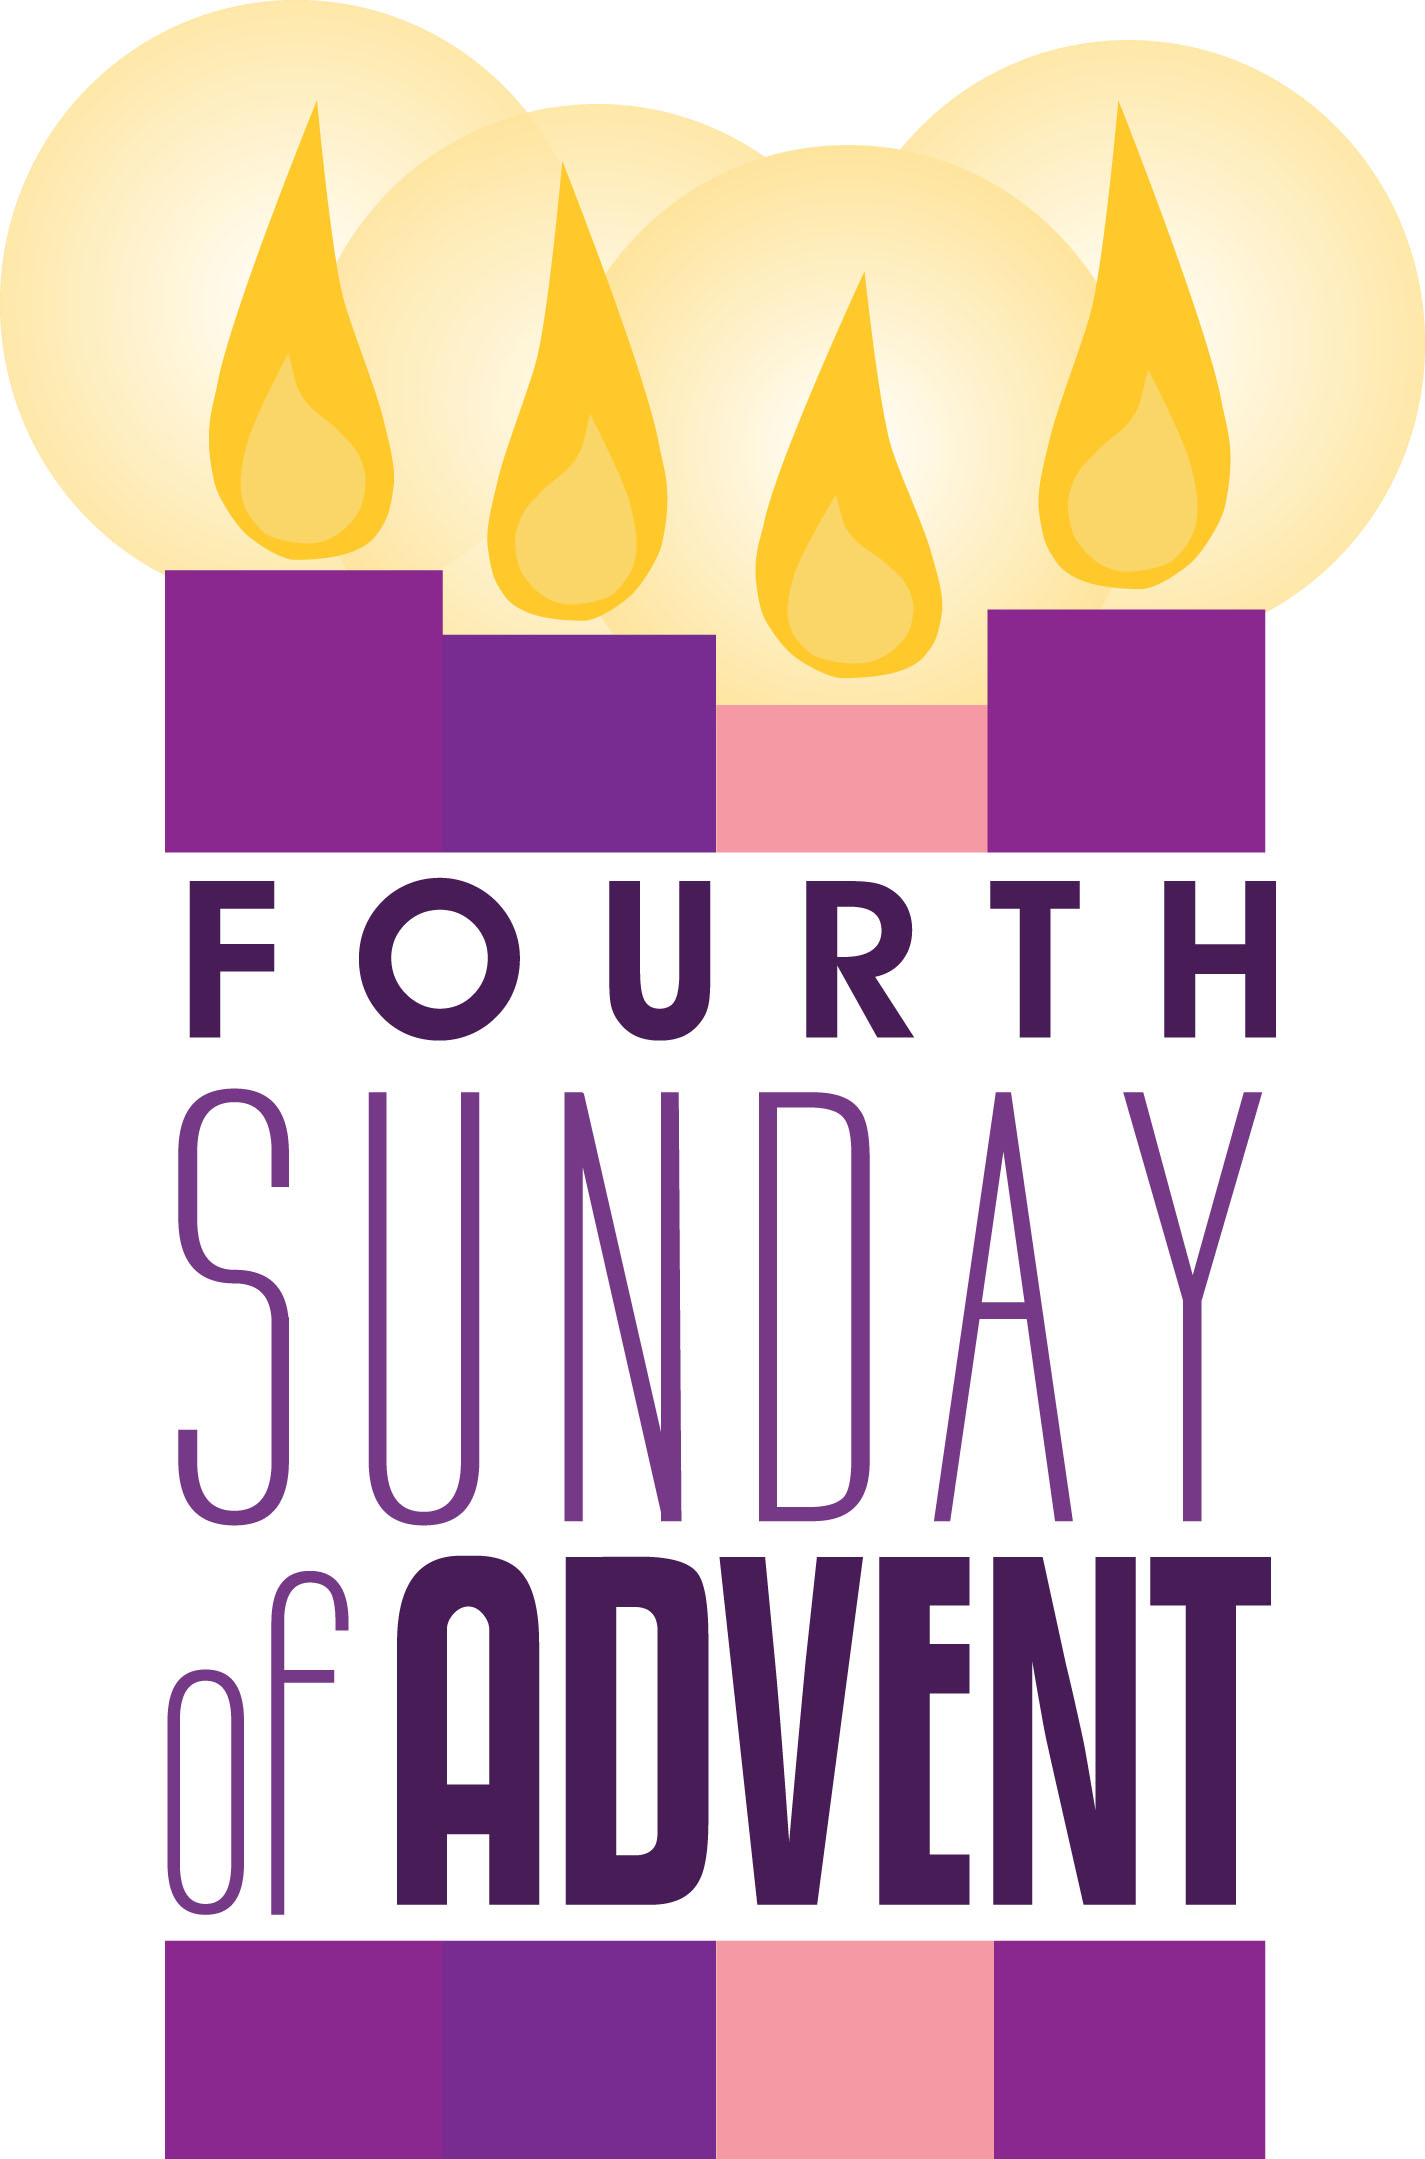 First sunday of free. Advent clipart advent love